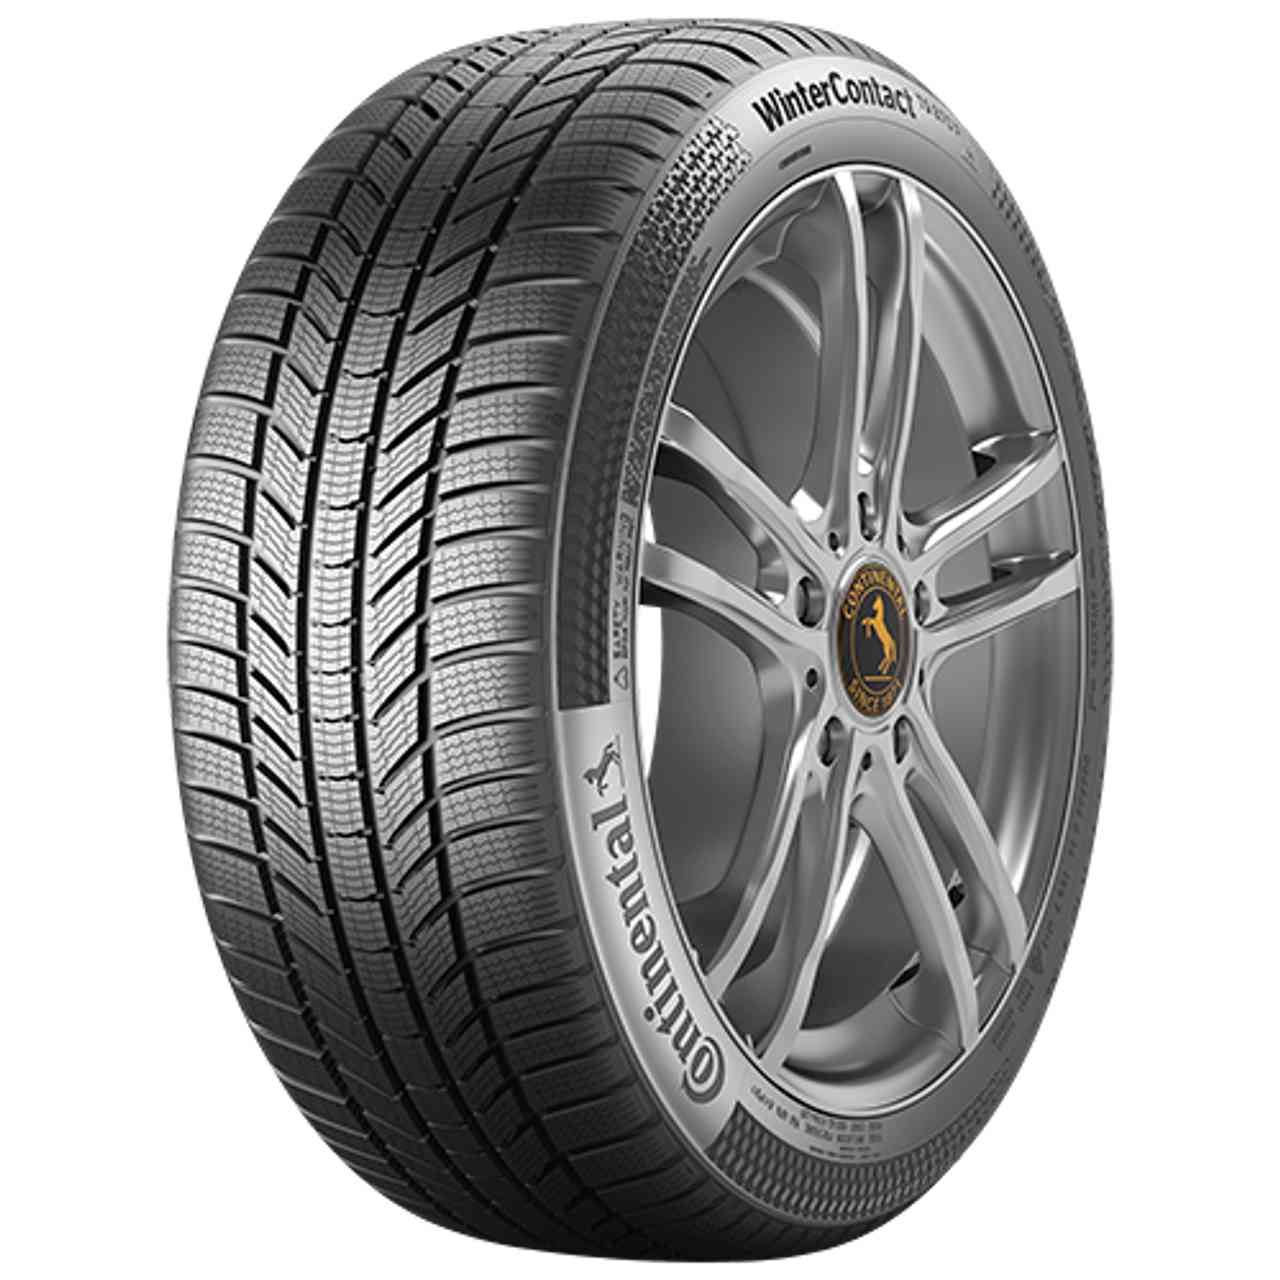 CONTINENTAL WINTERCONTACT TS 870 P 235/55R20 105V FR BSW von Continental